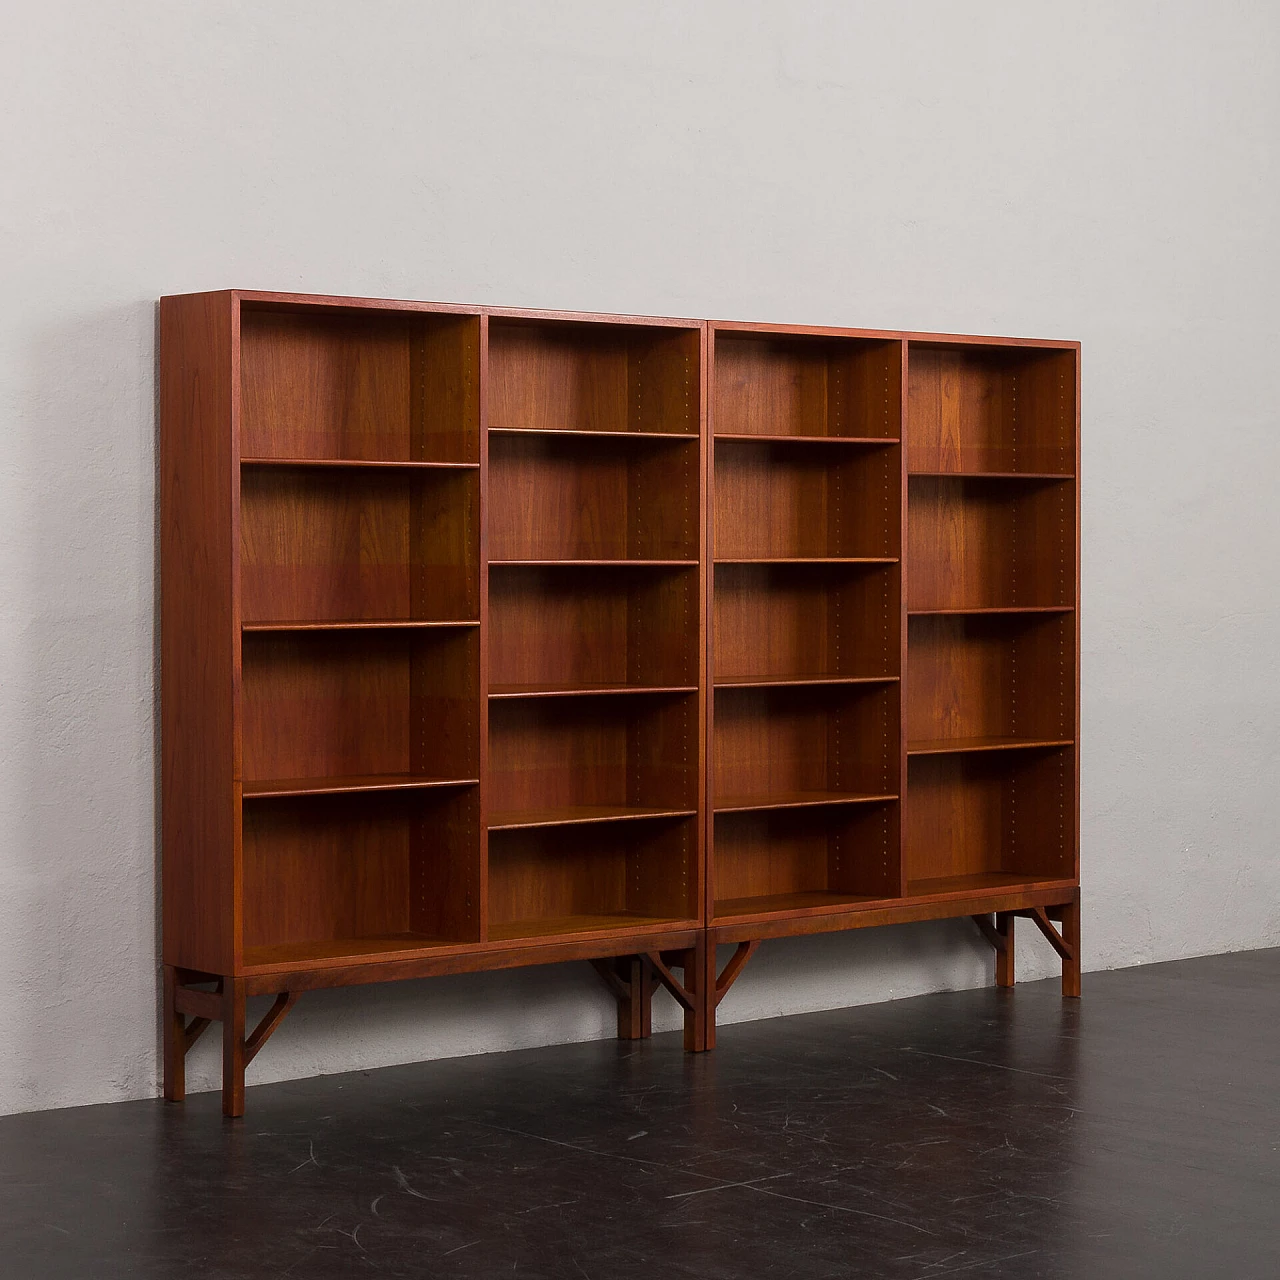 China bookcase by Børge Mogensen for C. M. Madsen, 1960s 5